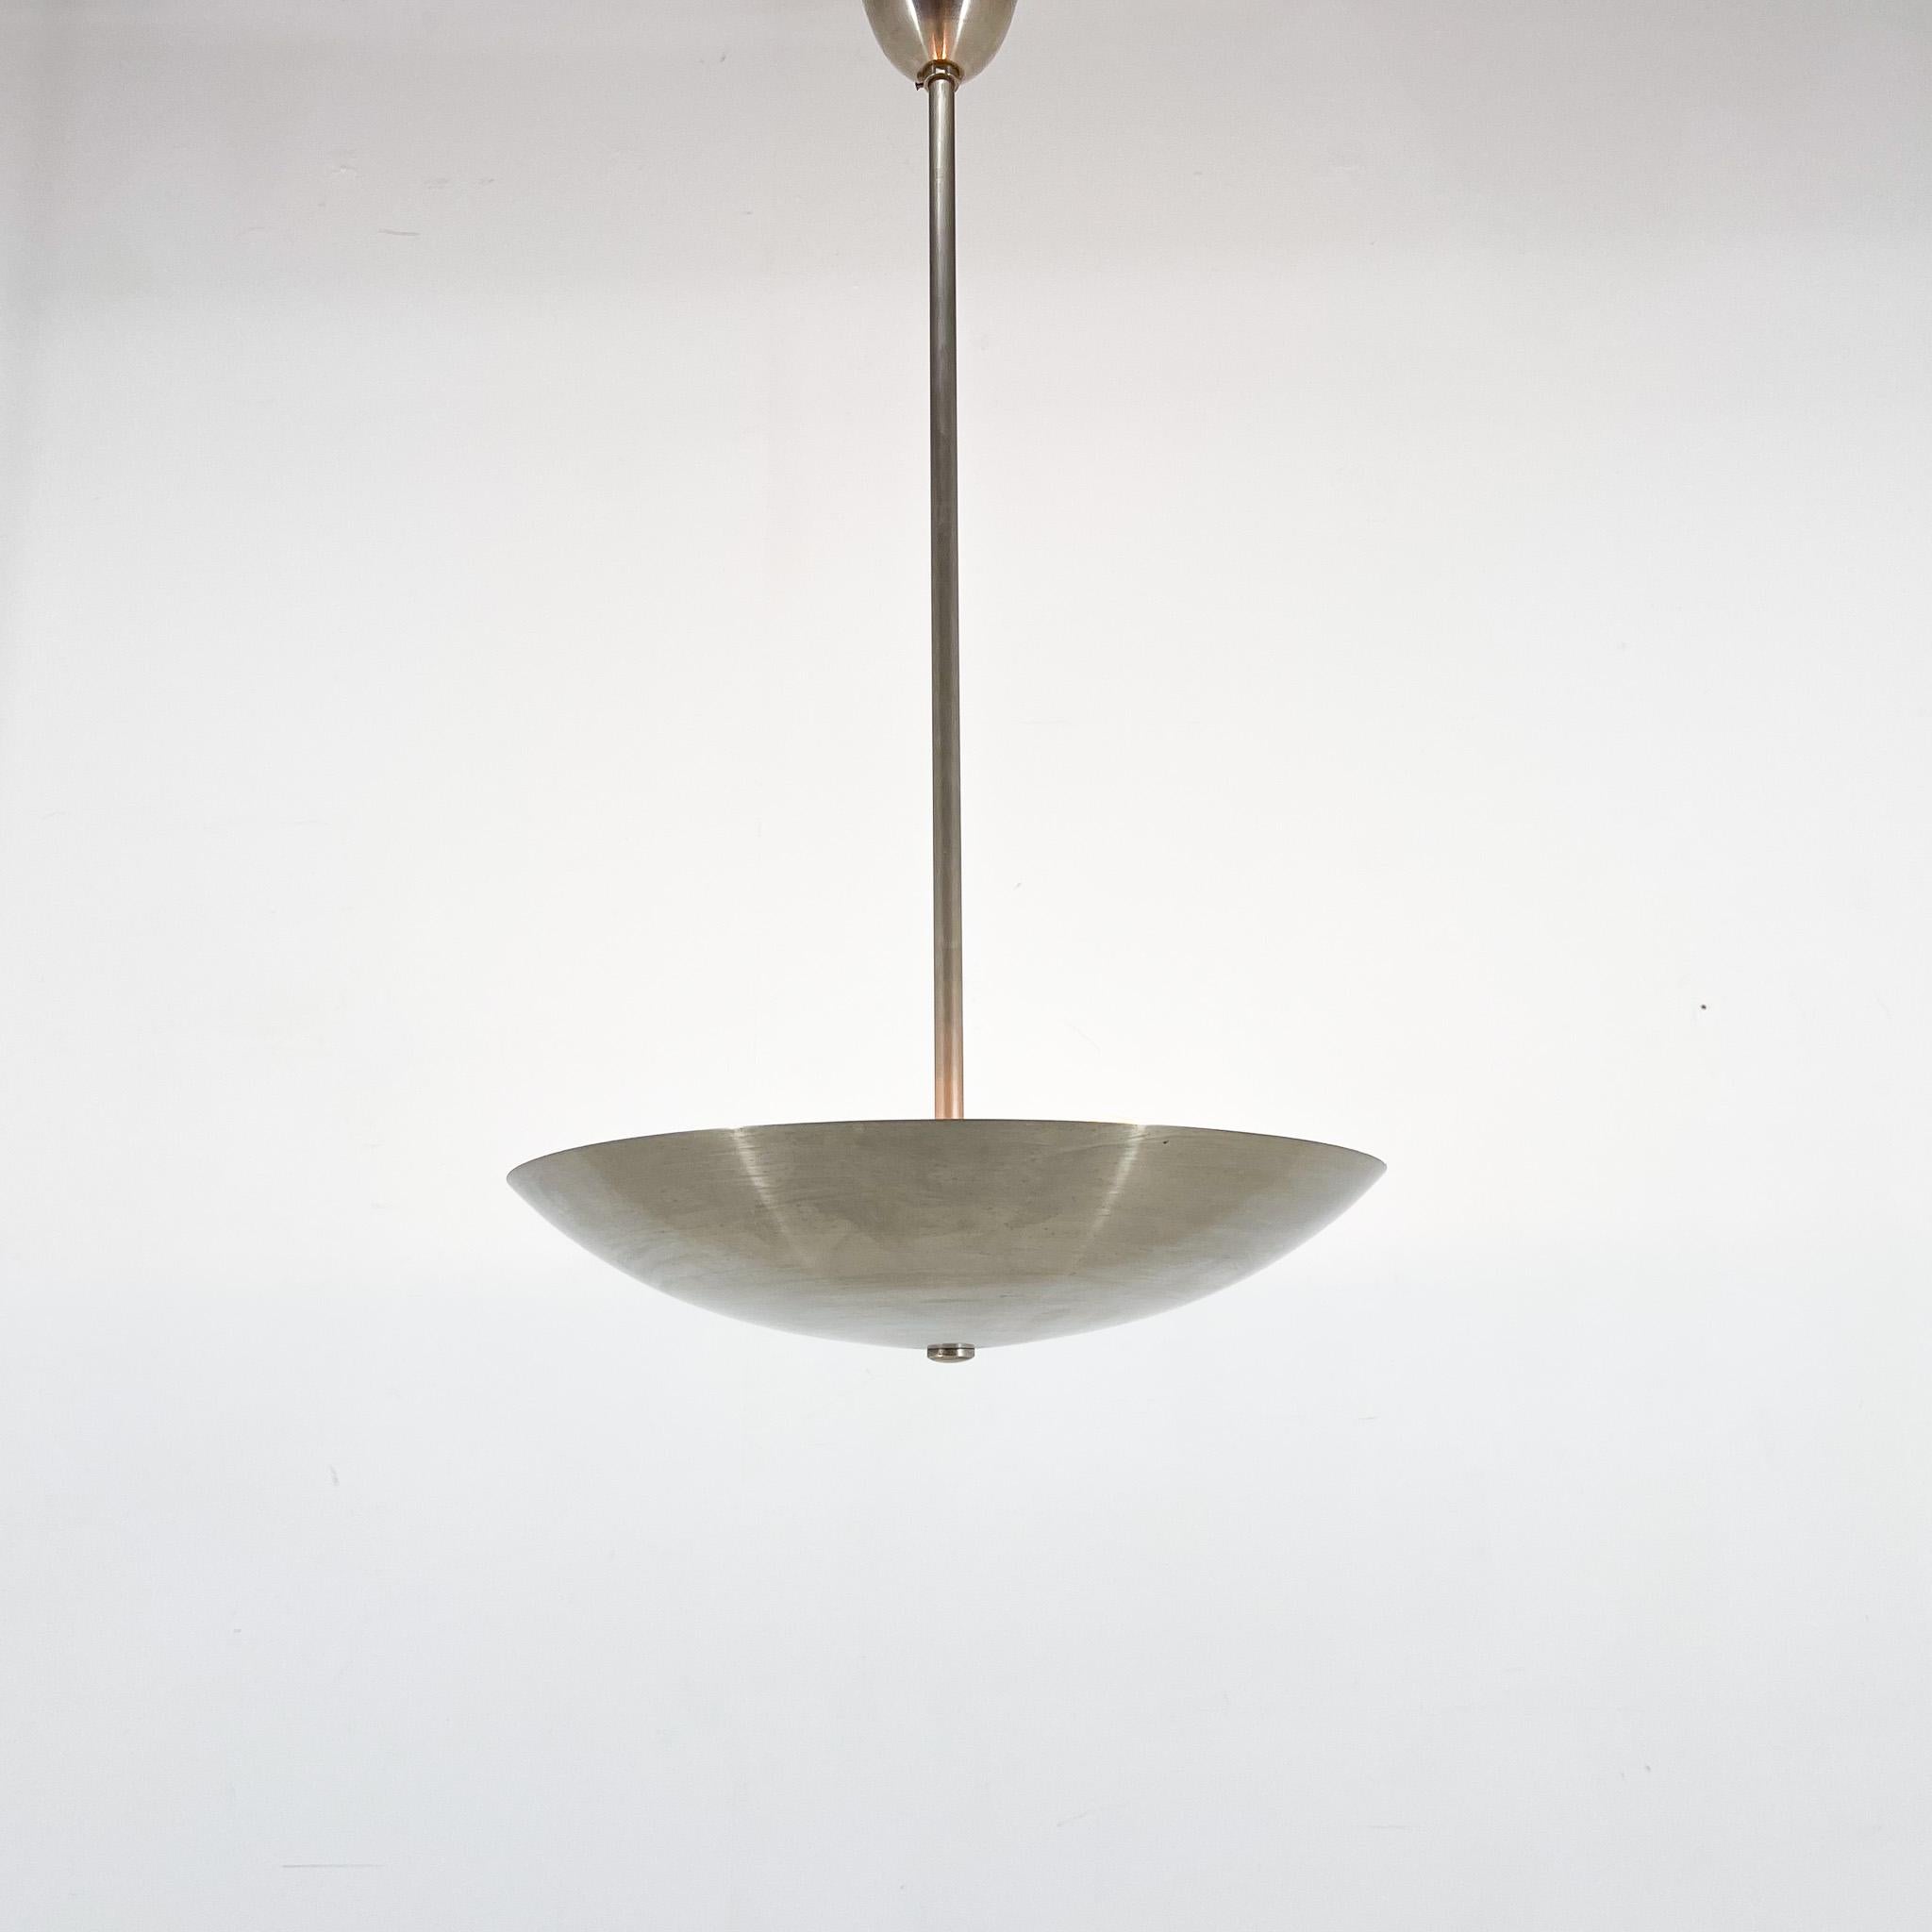 Art deco all chrome pendant light by famous designer Franta Anýž. Produced in former Czechoslovakia in the 1930's. Bulbs: 3x E25-E27. US wiring compatible.